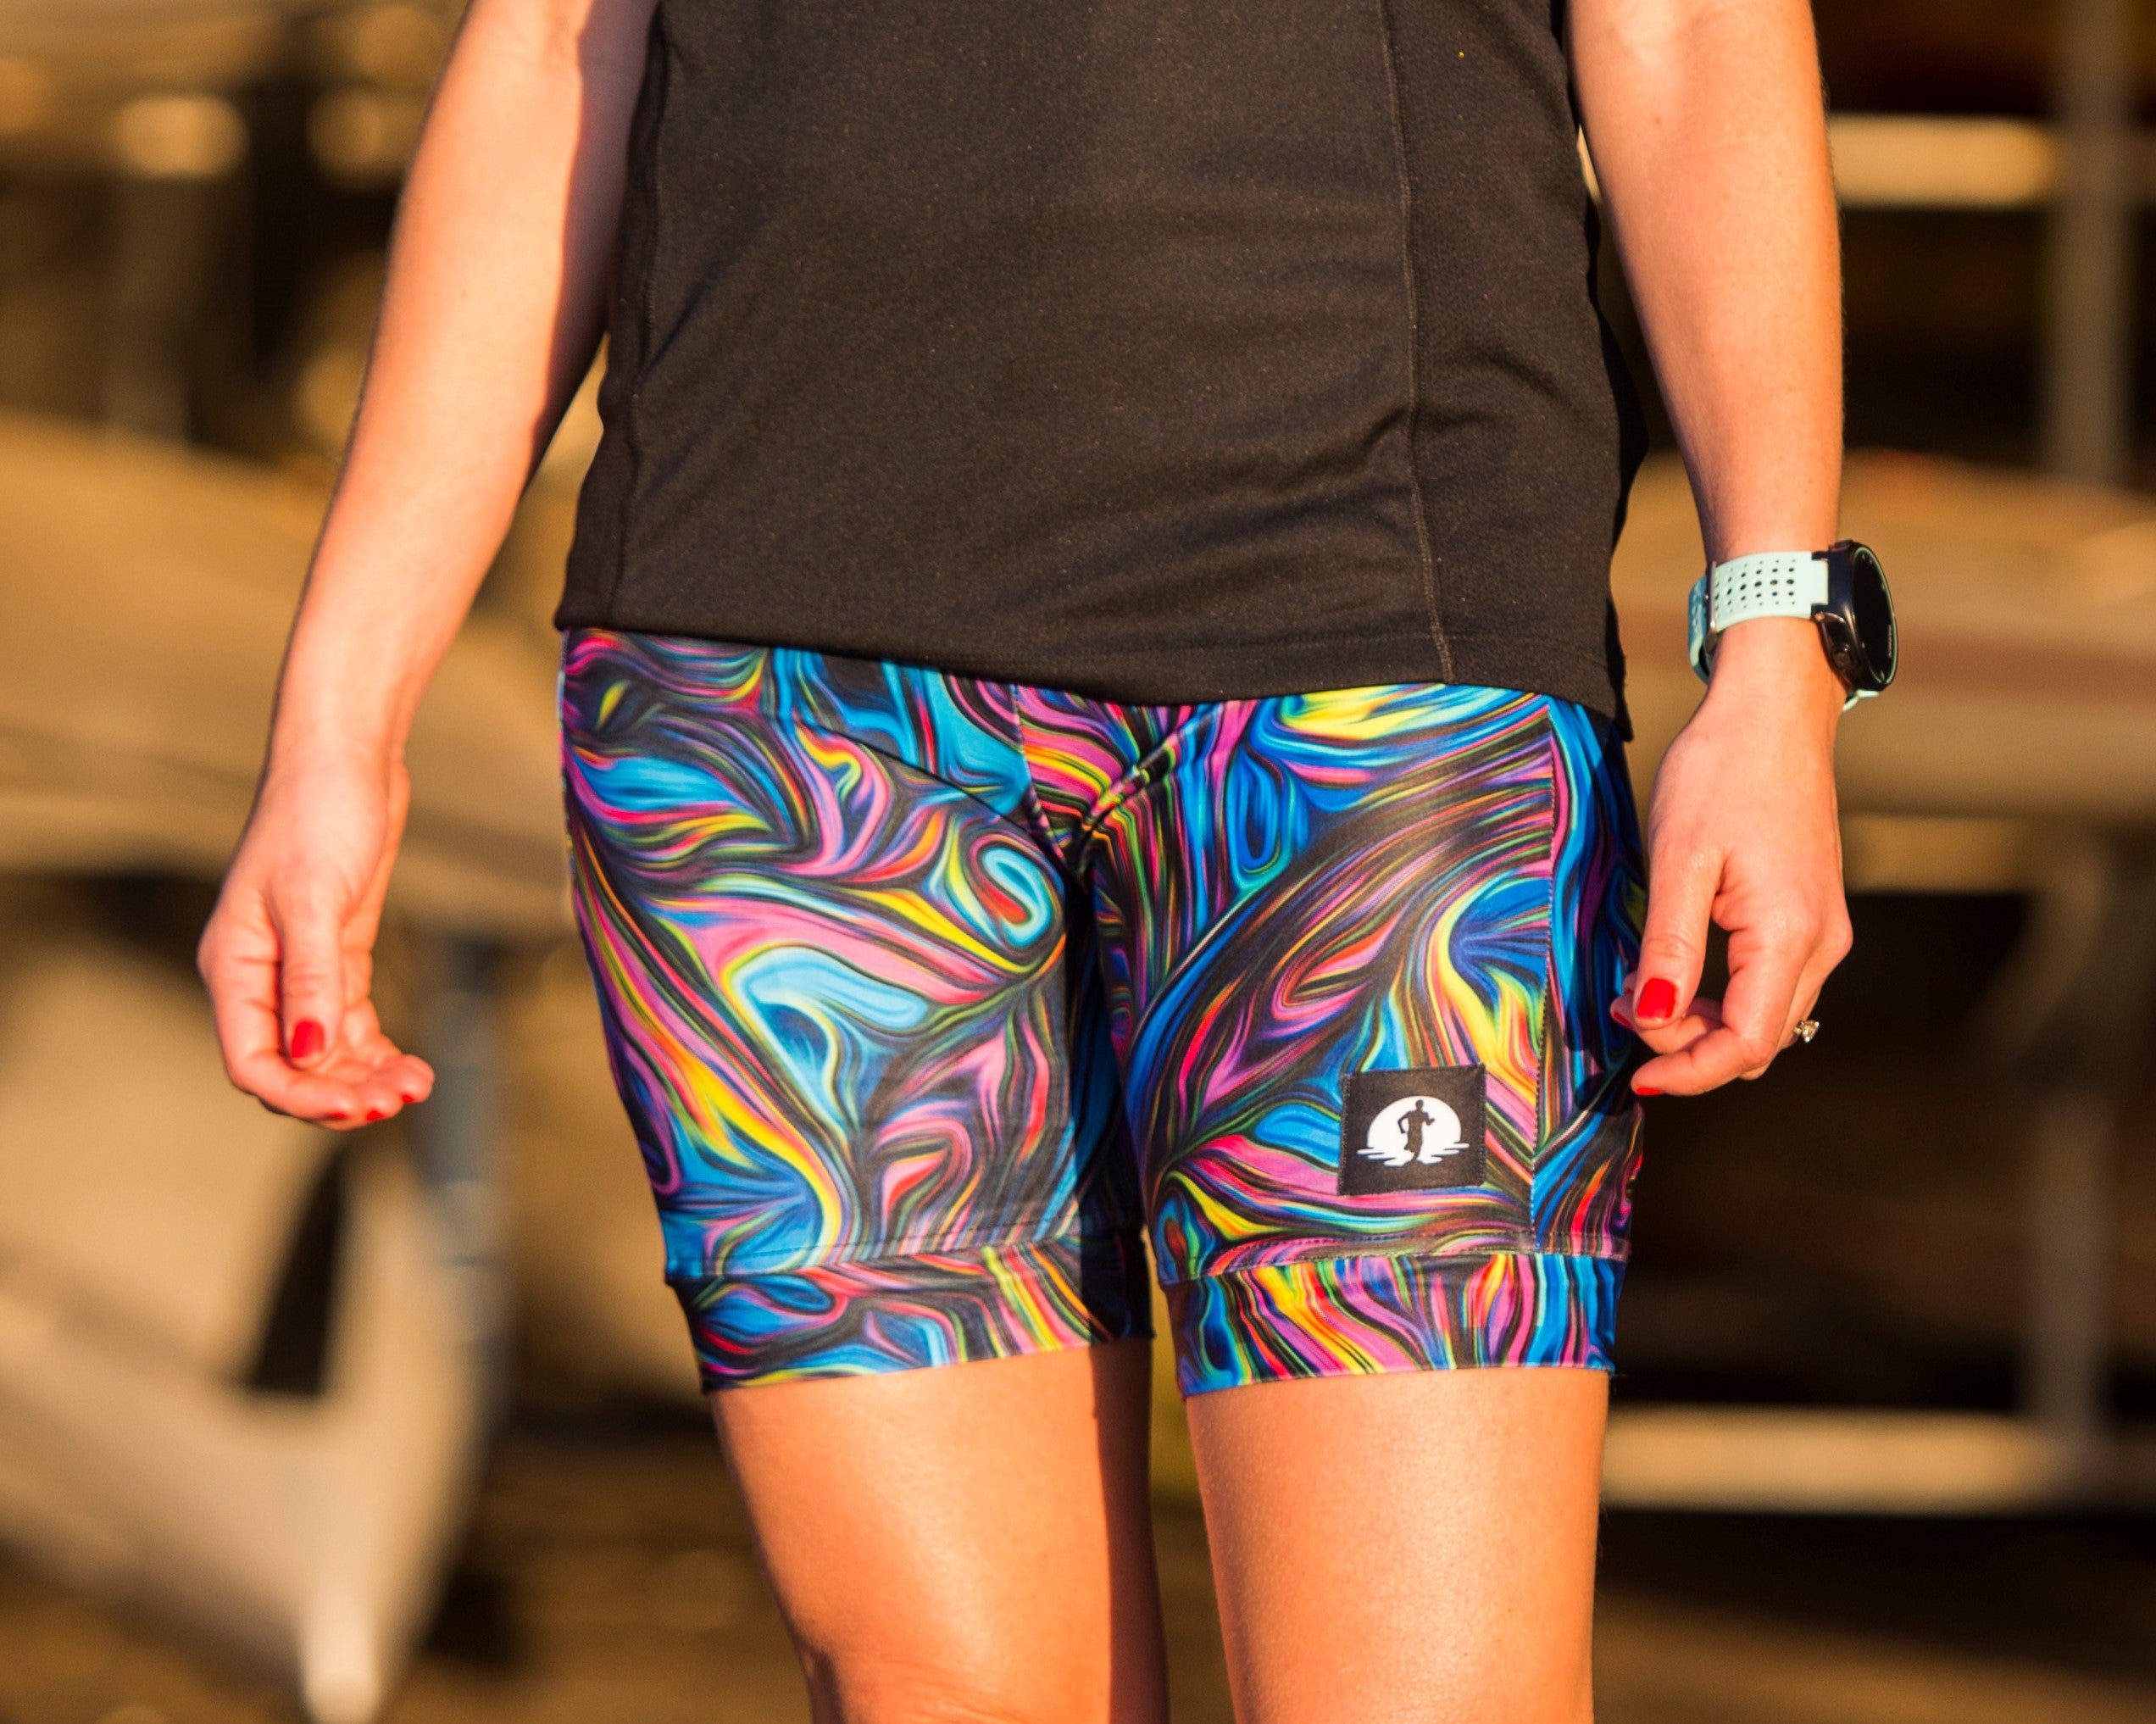 Funky Pants - #FunkyFemale Feature Michelle Schlebusch... | Facebook